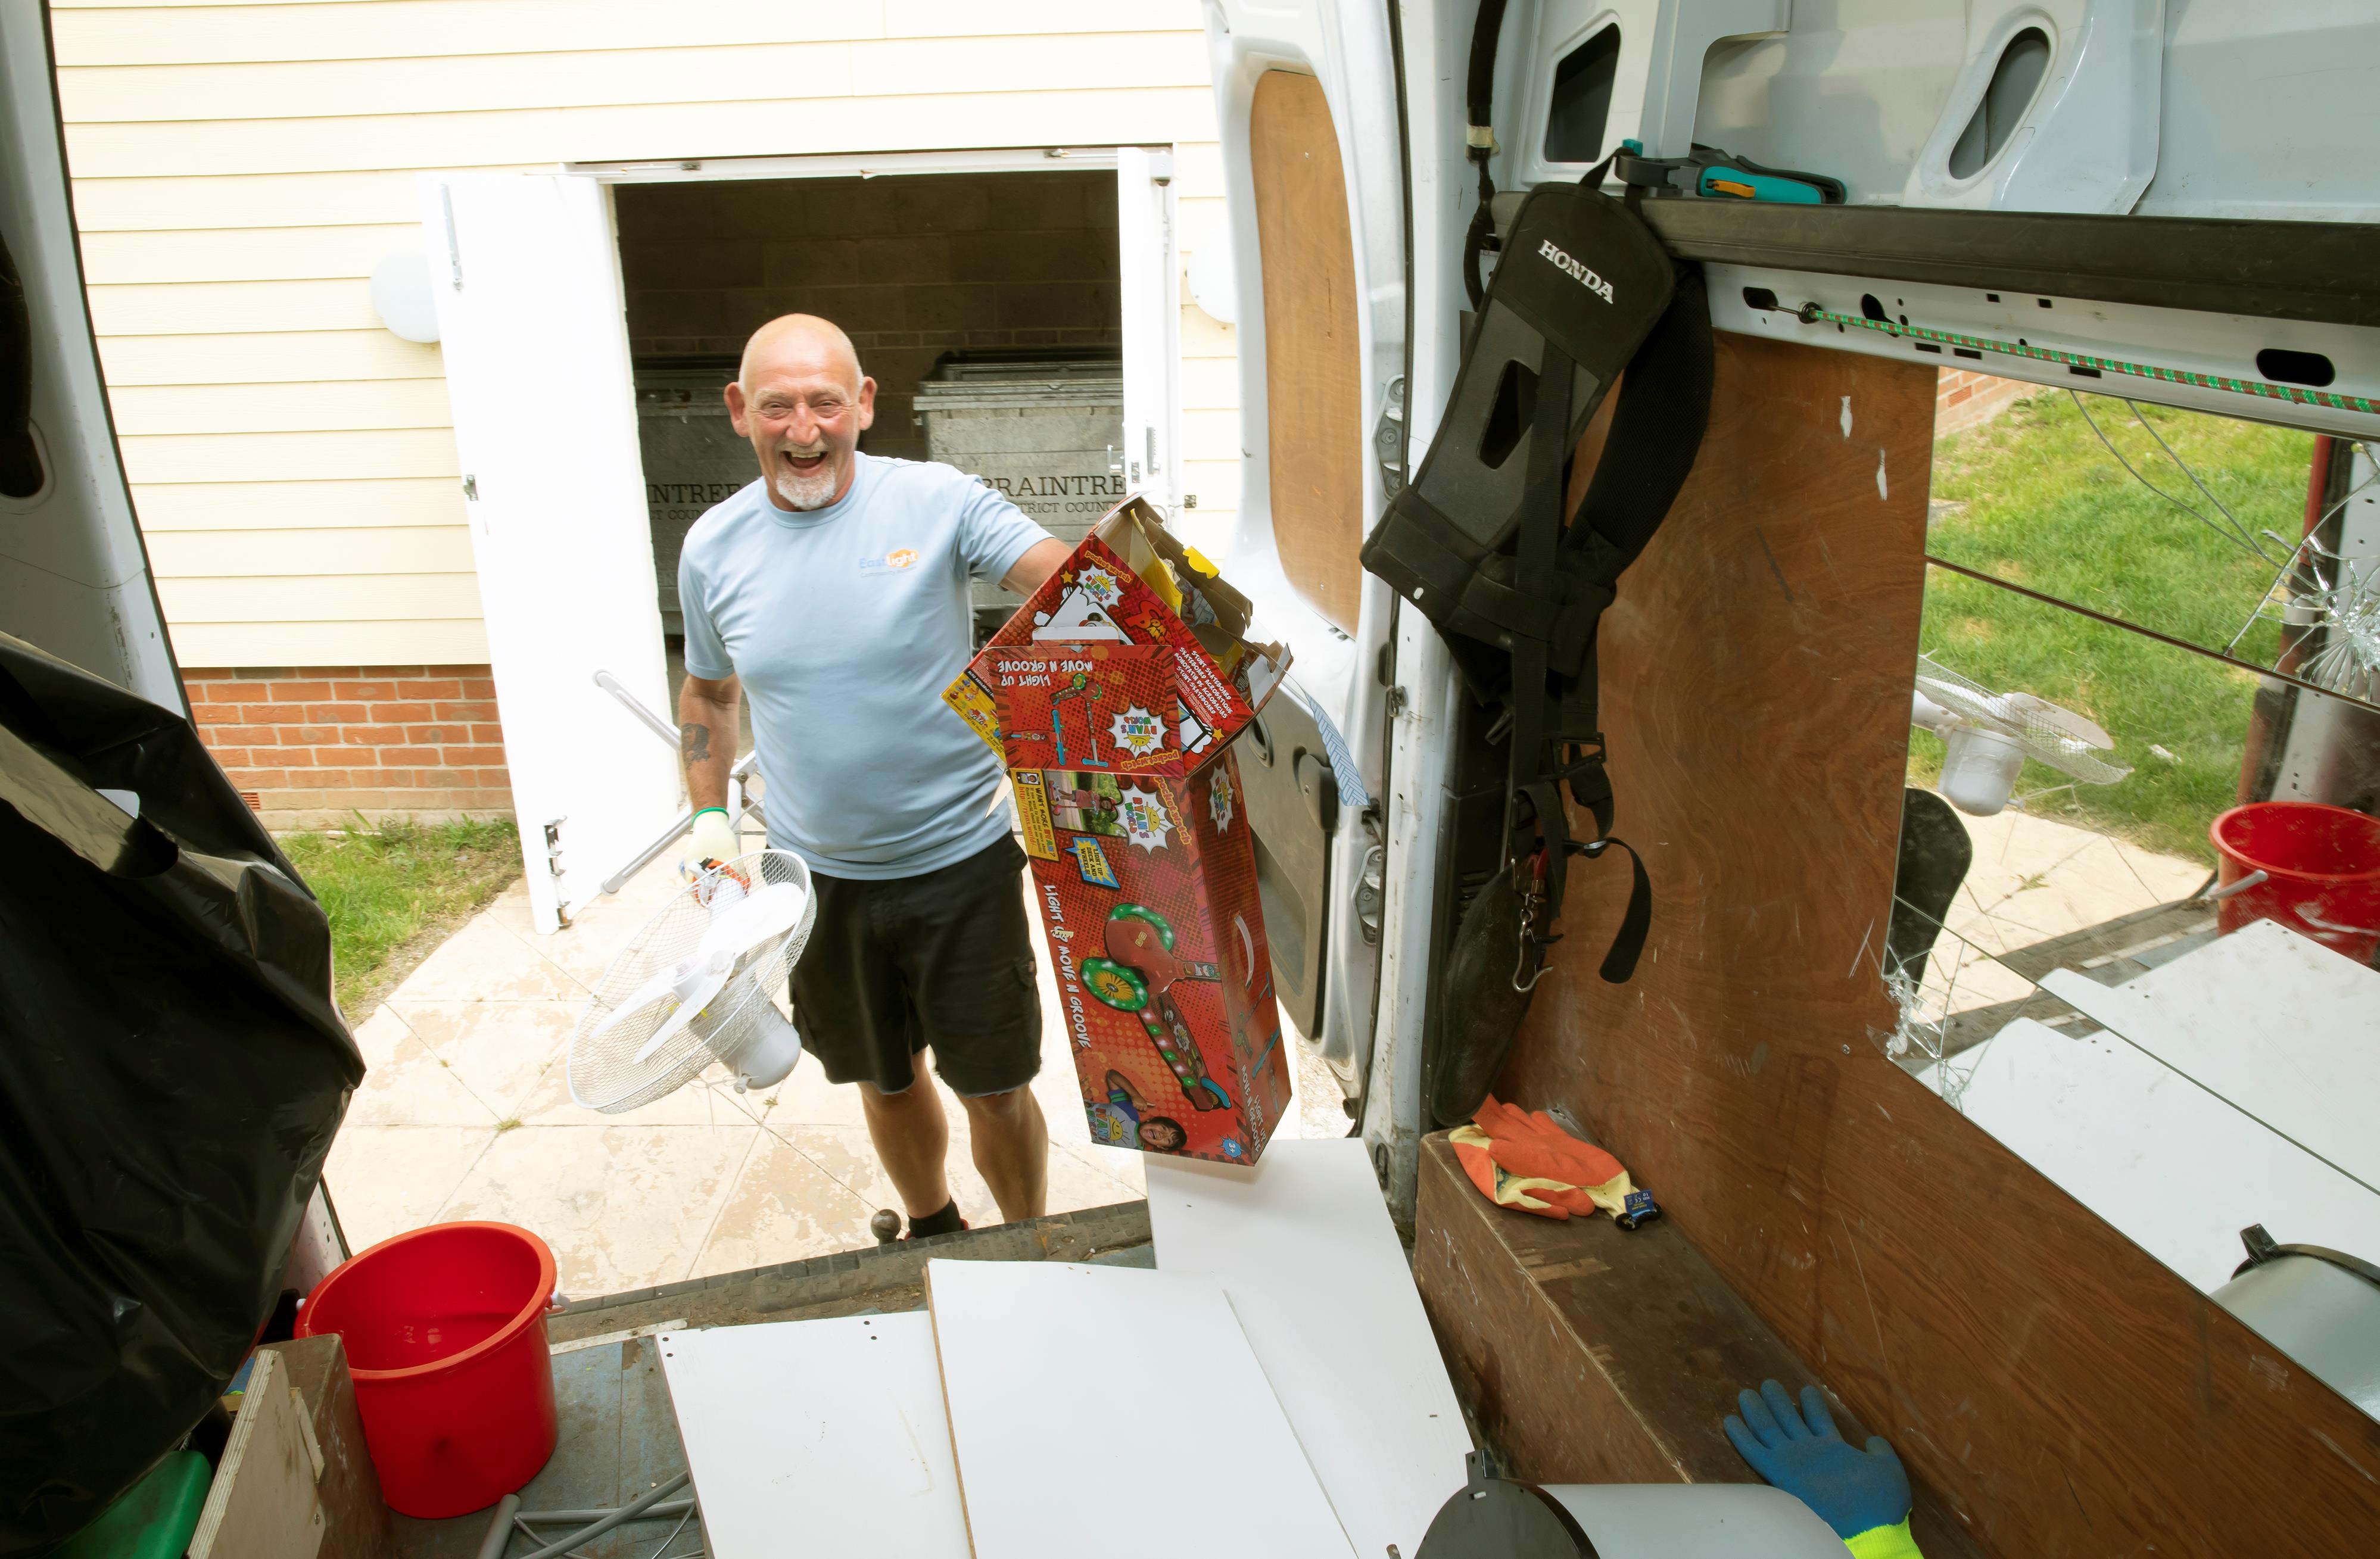 Estate Ranger, Marc Alliston, is putting unwanted items and cardboard into the back of his van. The point of view is from inside the van and he is smiling.